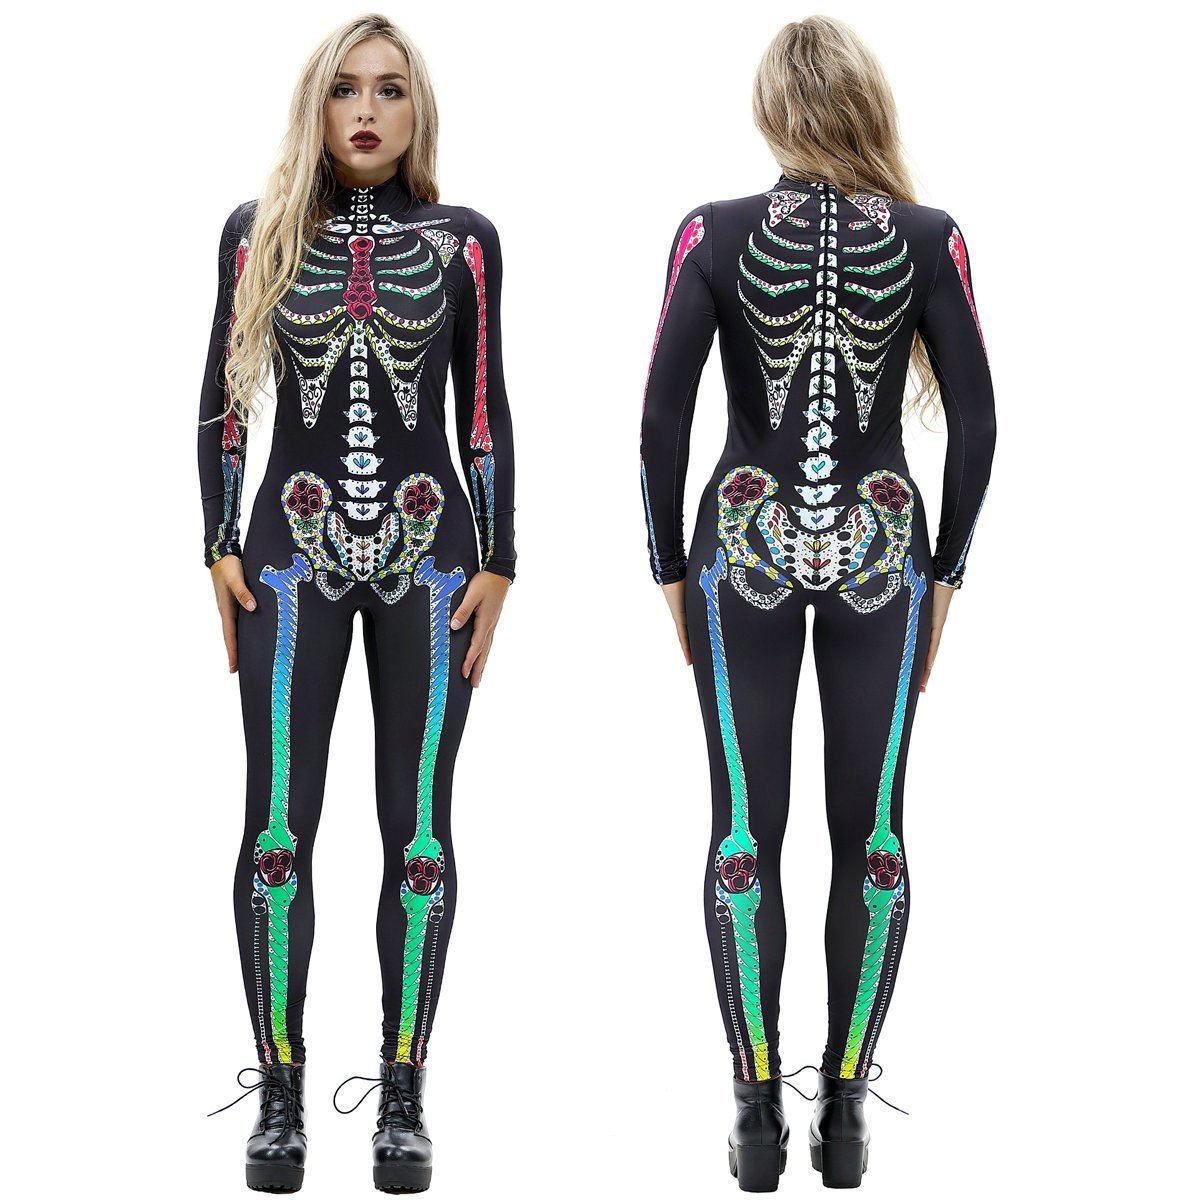 Colorful Skull Print Cosplay Halloween Costume Jumpsuit for Women